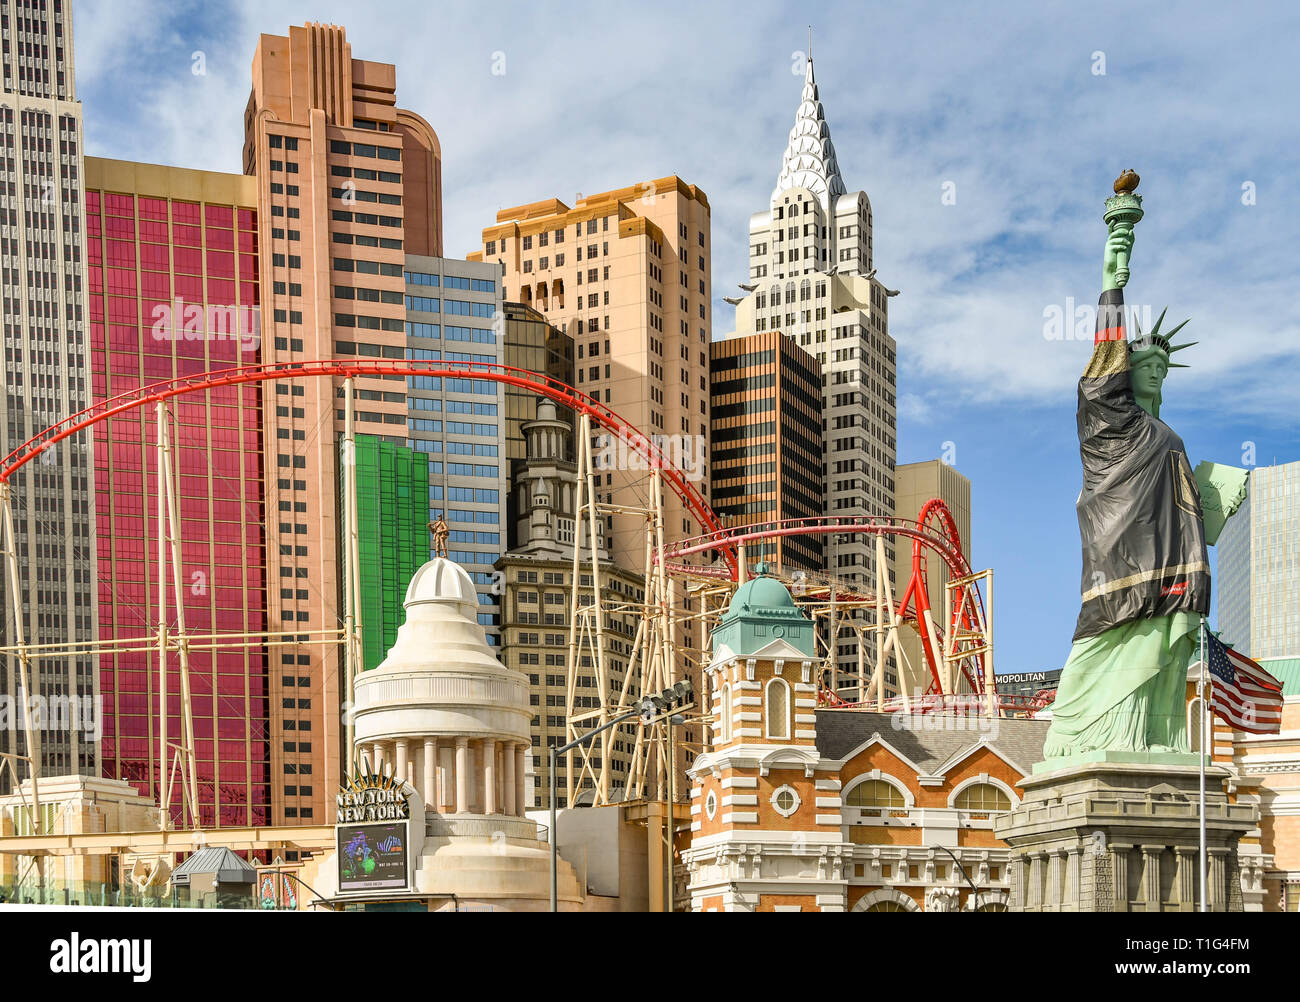 LAS VEGAS, NV, USA - FEBRUARY 2019: Wide angle view of the New York New York Hotel in Las Vegas Stock Photo